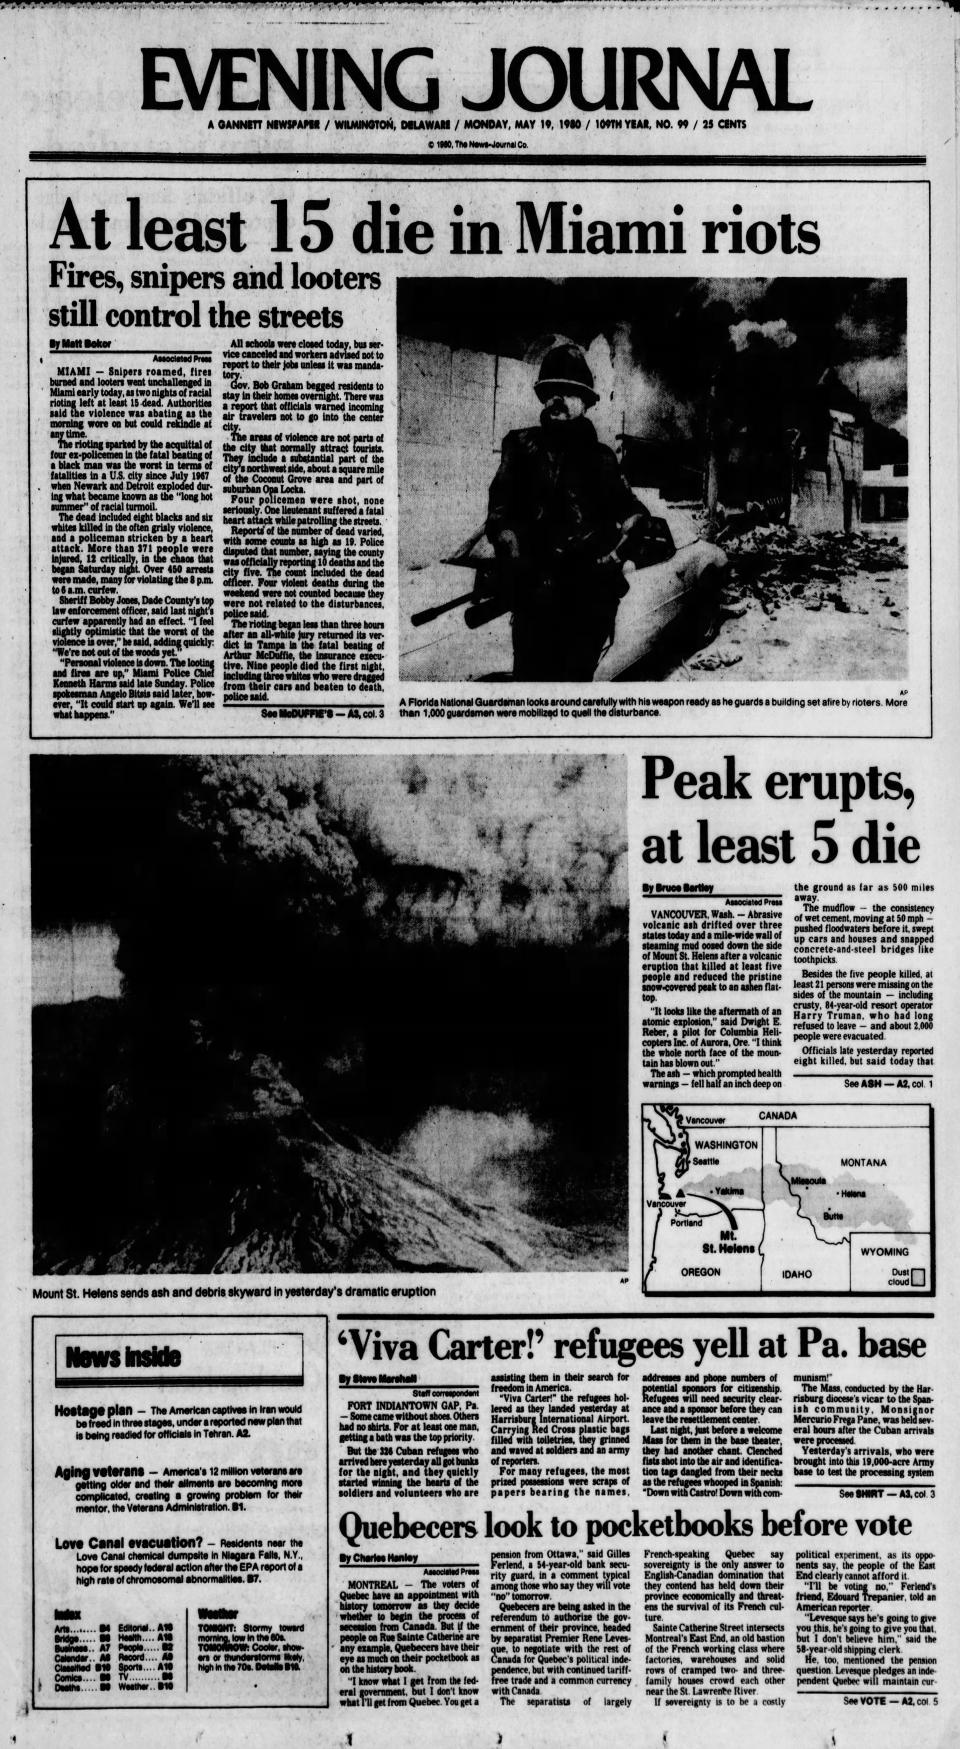 Front page of the Evening Journal from May 19, 1980.